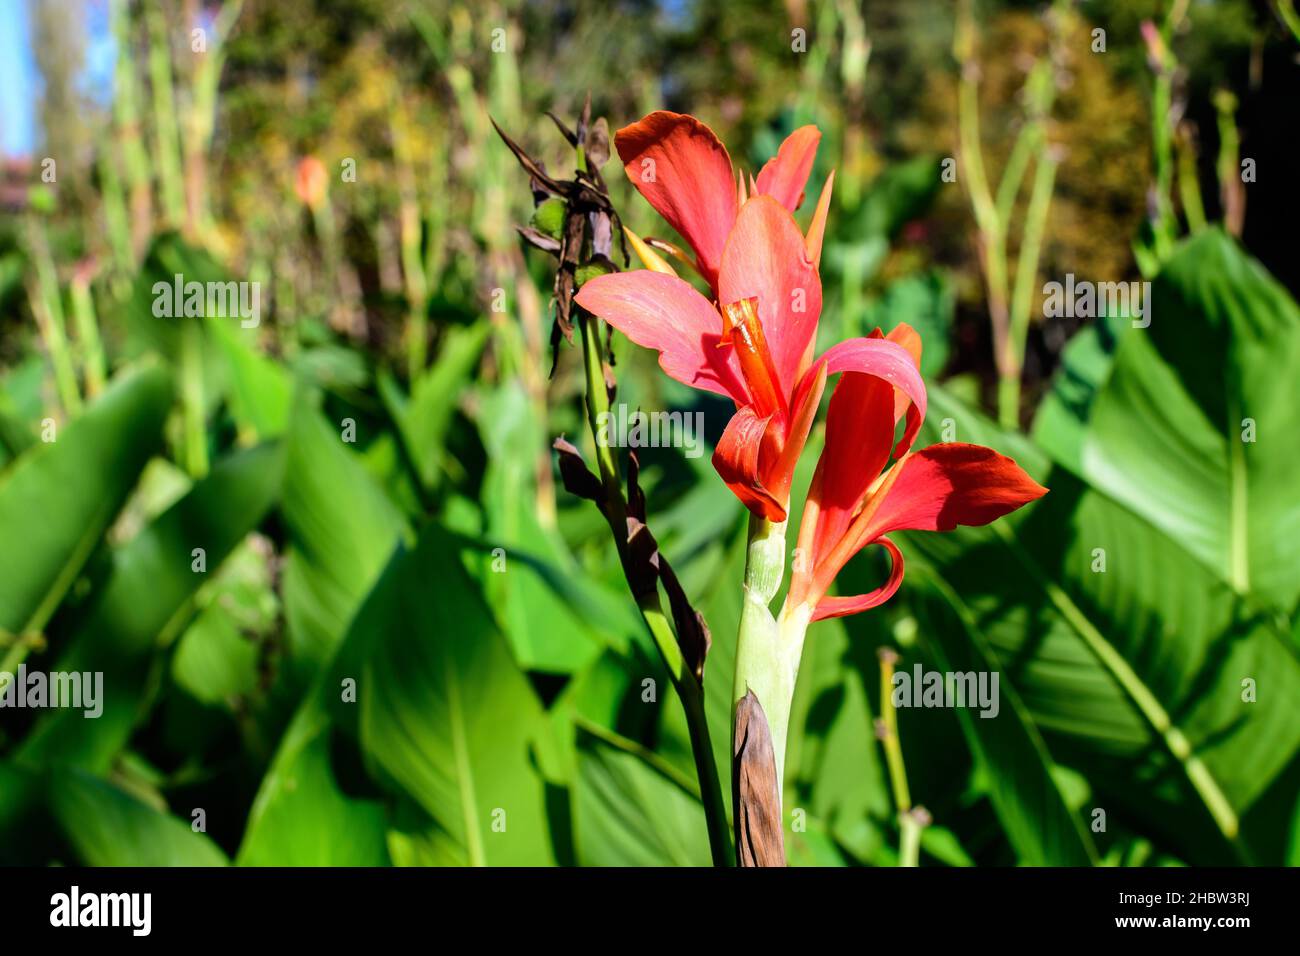 Red flowers of Canna indica, commonly known as Indian shot, African arrowroot, edible canna, purple arrowroot or Sierra Leone arrowroot, in soft focus Stock Photo